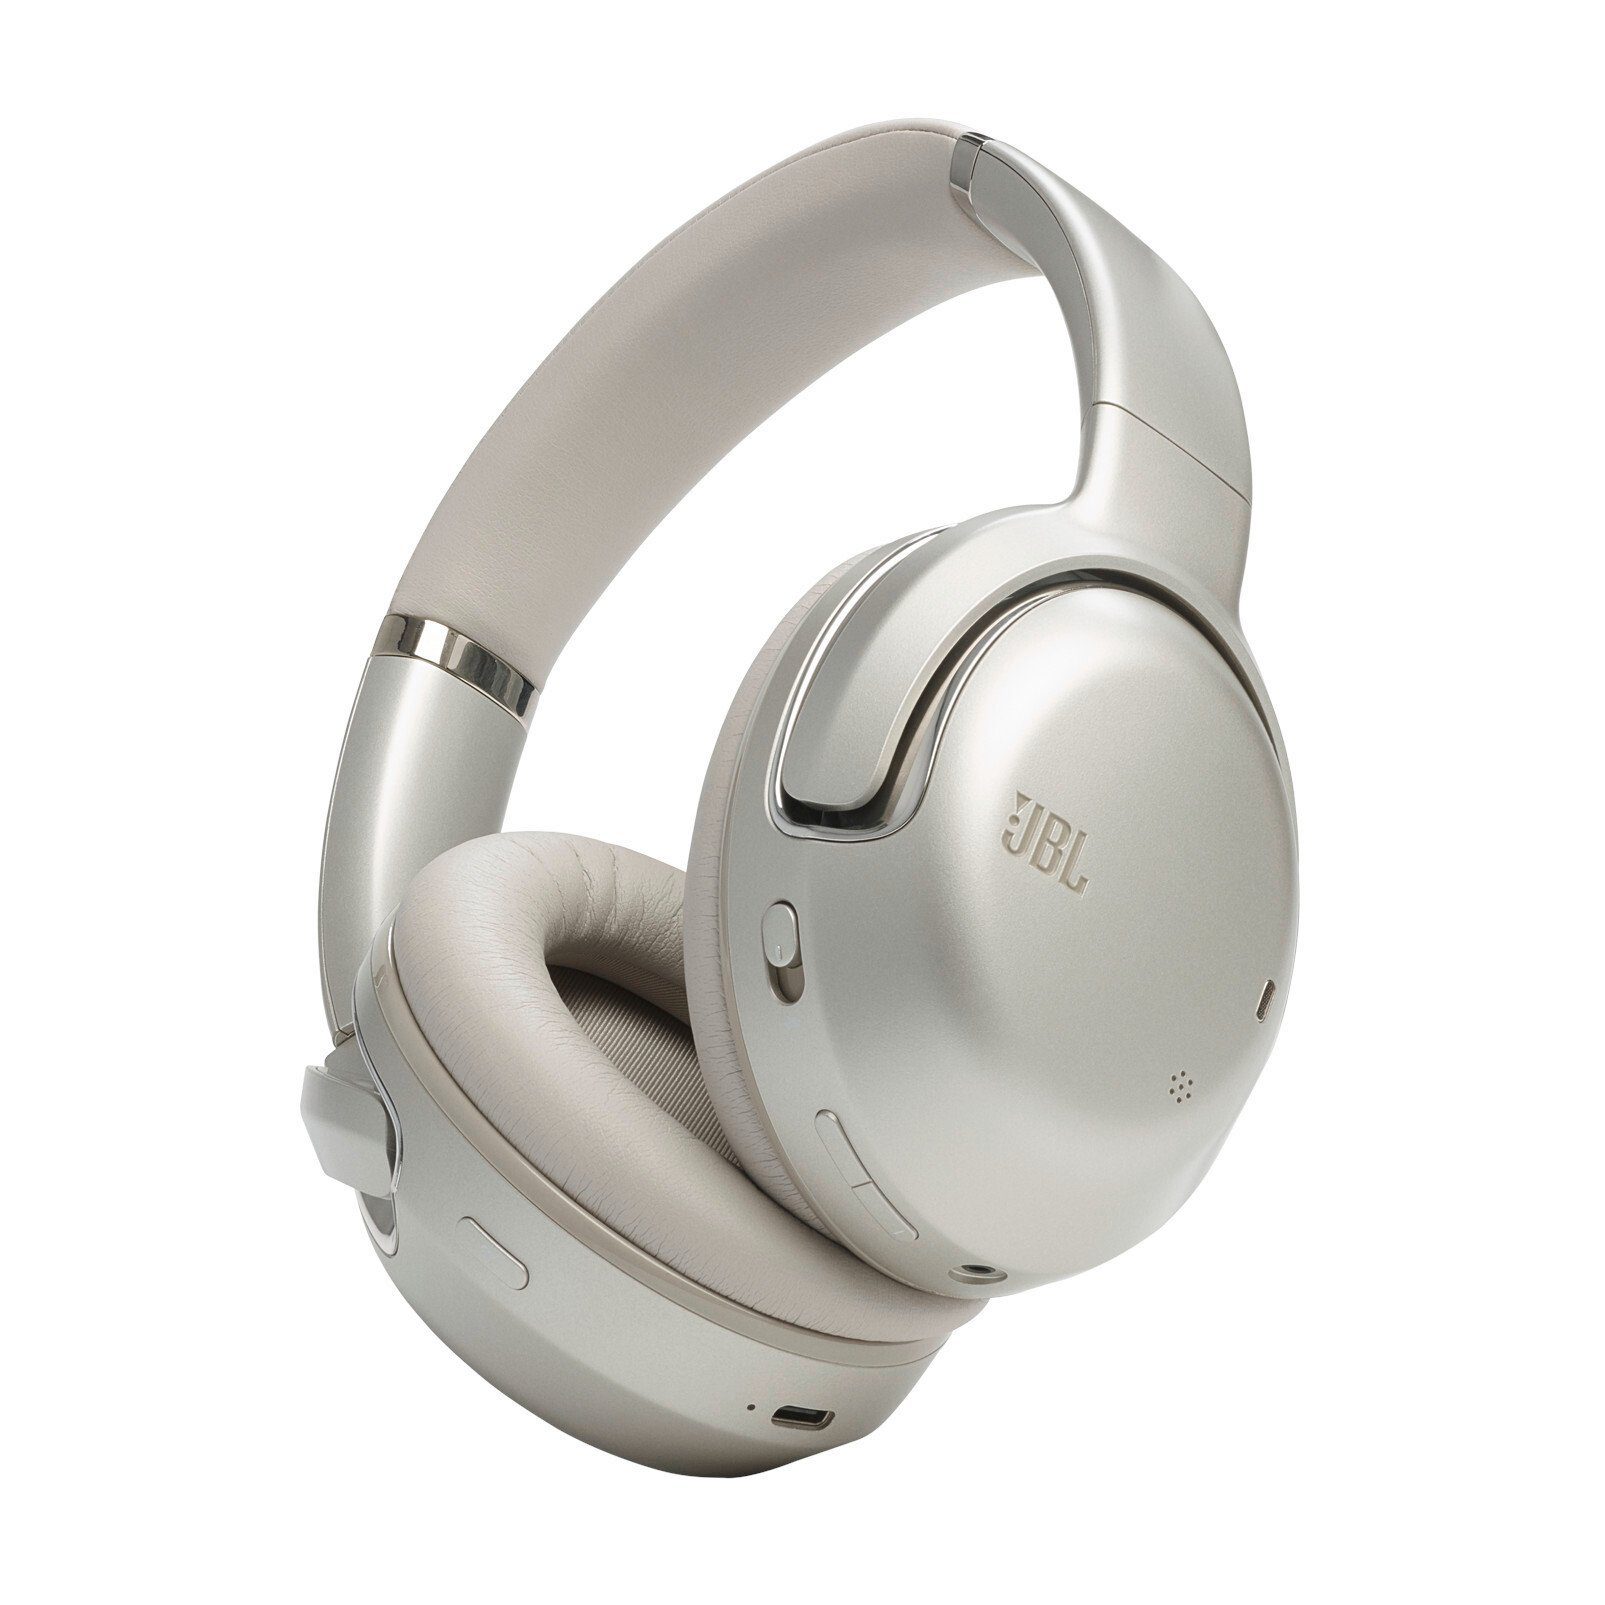 TOUR ONE (Noise-Cancelling) M2 JBL Headset Champagne